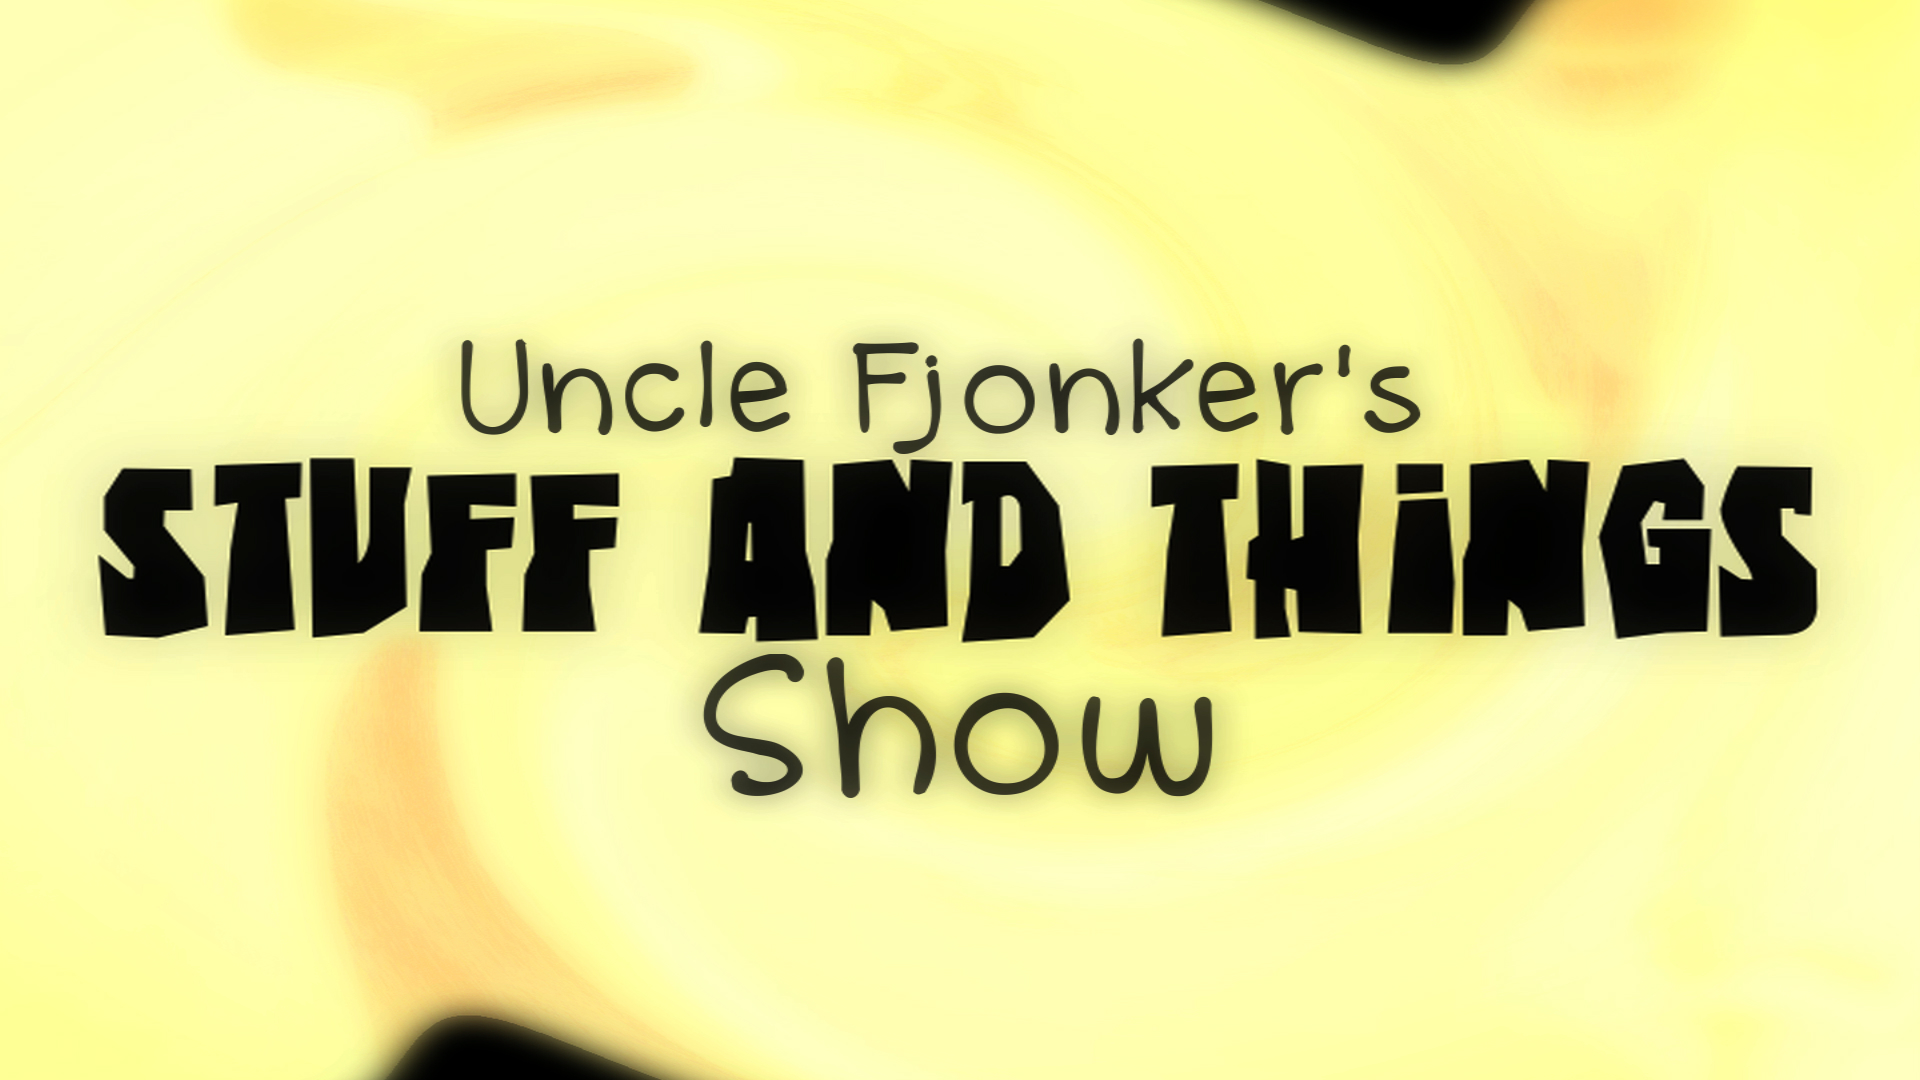 Uncle Fjonker's Stuff and Things Show